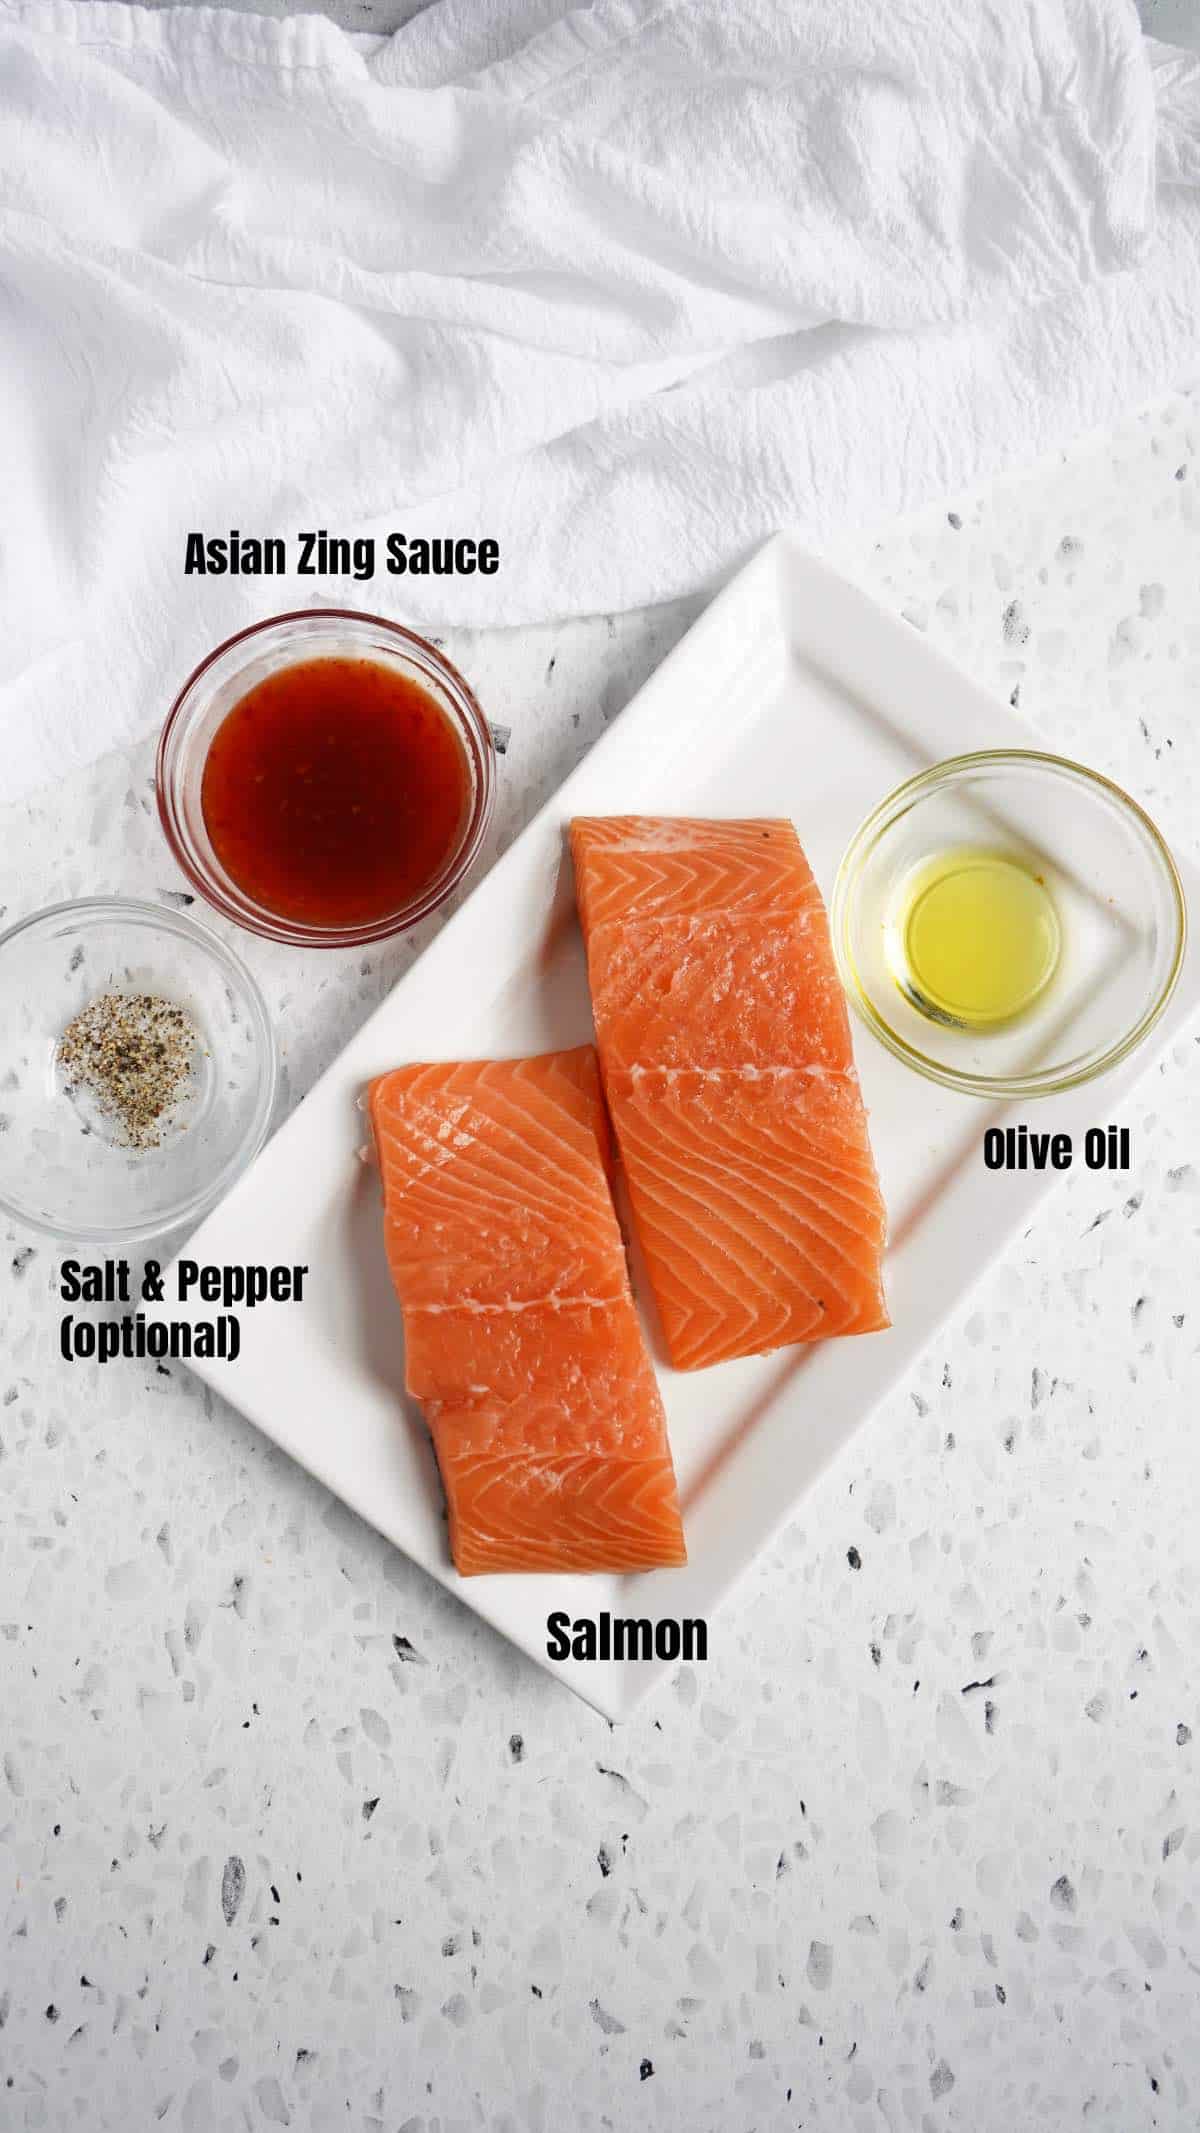 Asian Zing Salmon Ingredients with titles